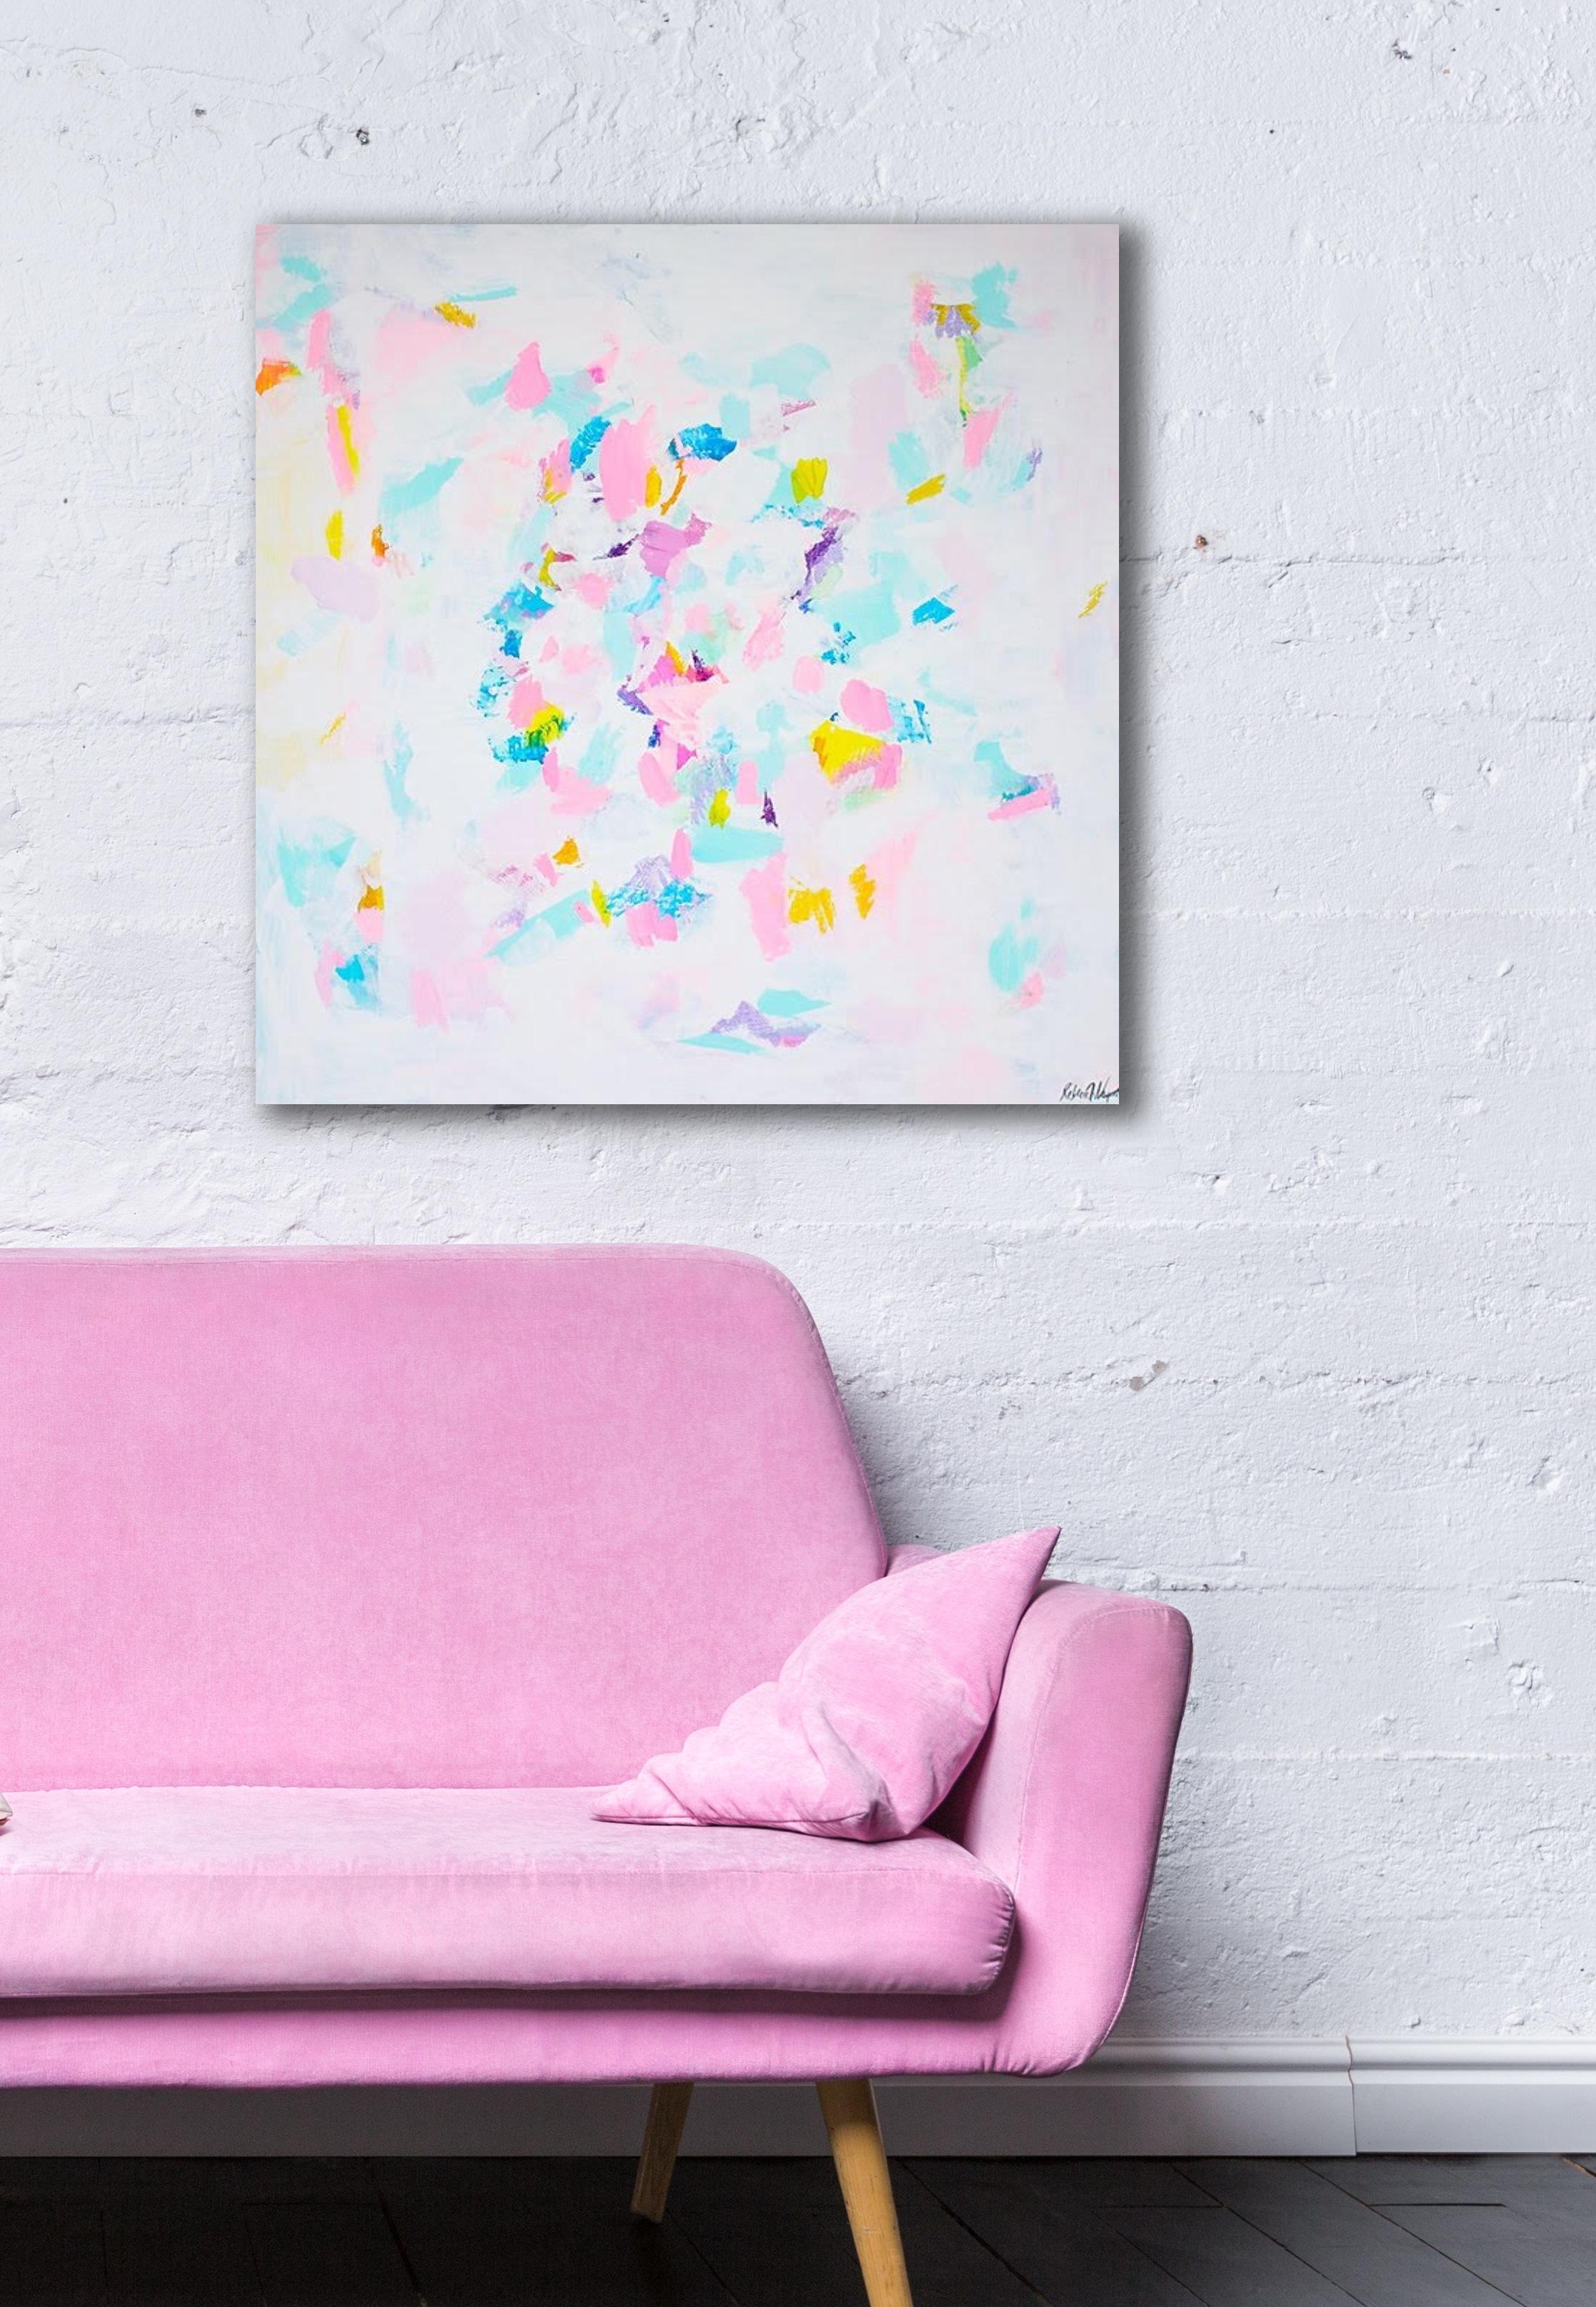 Rebecca Newport
Rose Garden
Contemporary Abstract Painting
Acrylic and Oil Stick on canvas
Canvas Size H 60cm x W 60cm x D 1.8cm
Sold unframed.
Please note that insitu images are purely an indication of how a piece may look.

‘Rose Garden’ is an